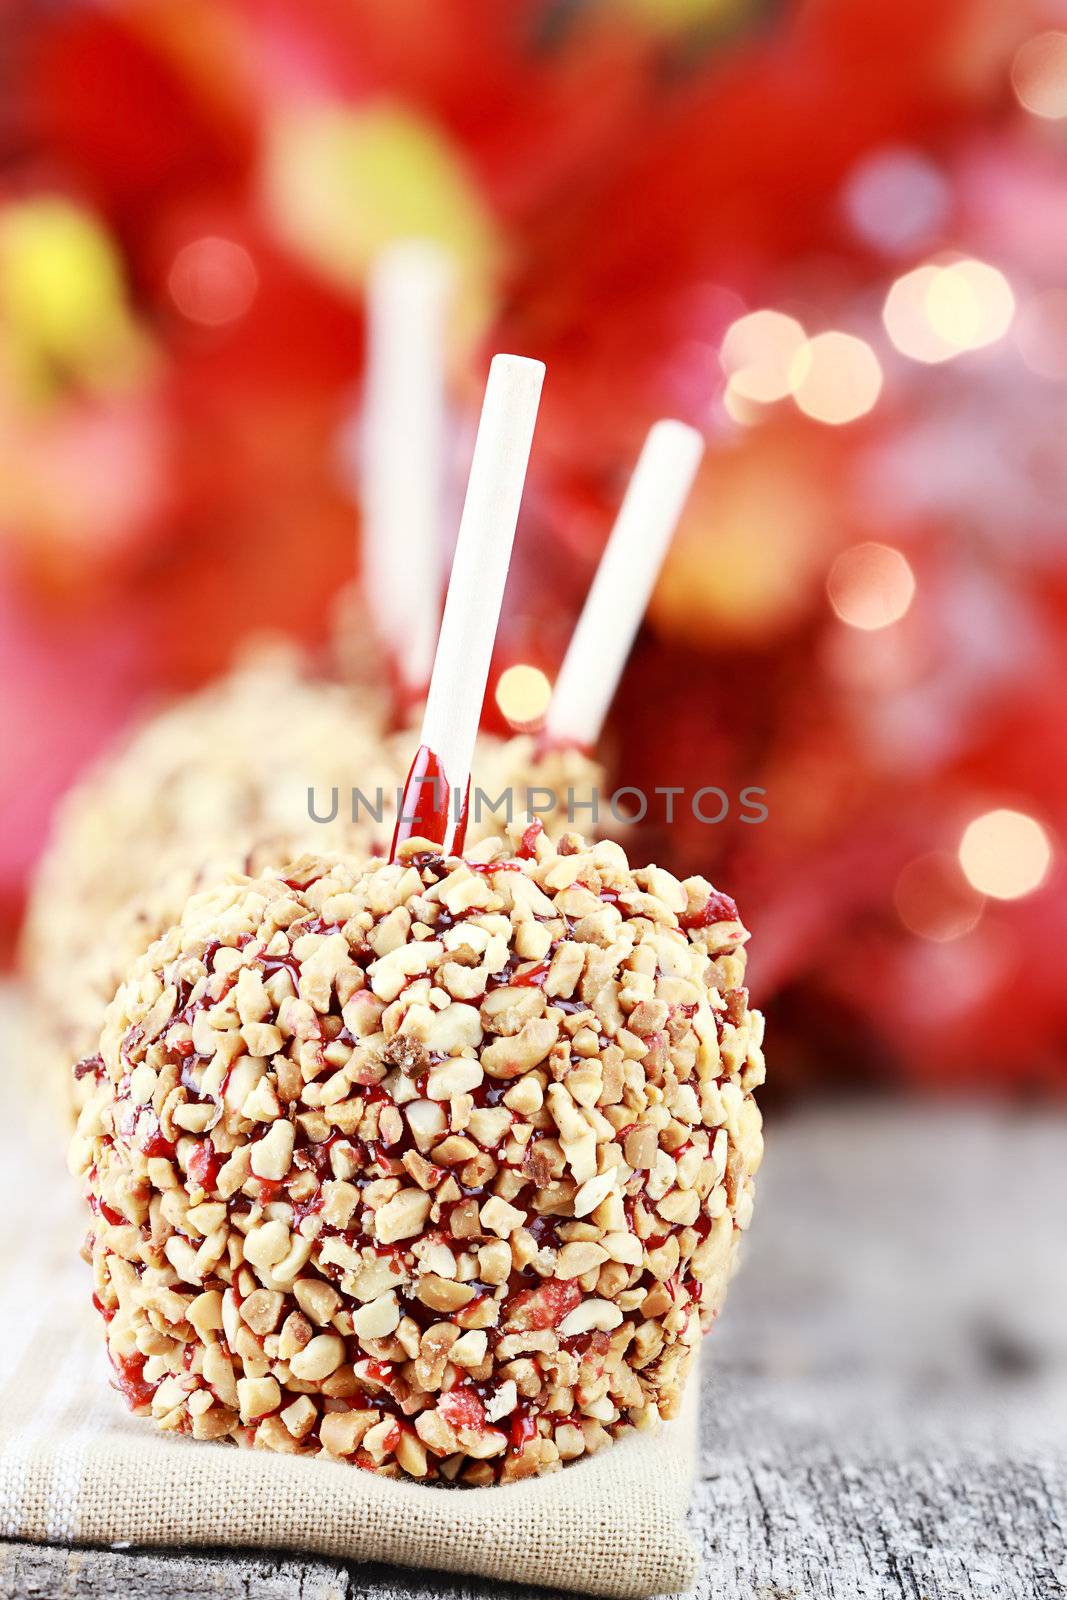 Three candy covered apples on napkin. Extreme shallow depth of field with selective focus on first apple.
